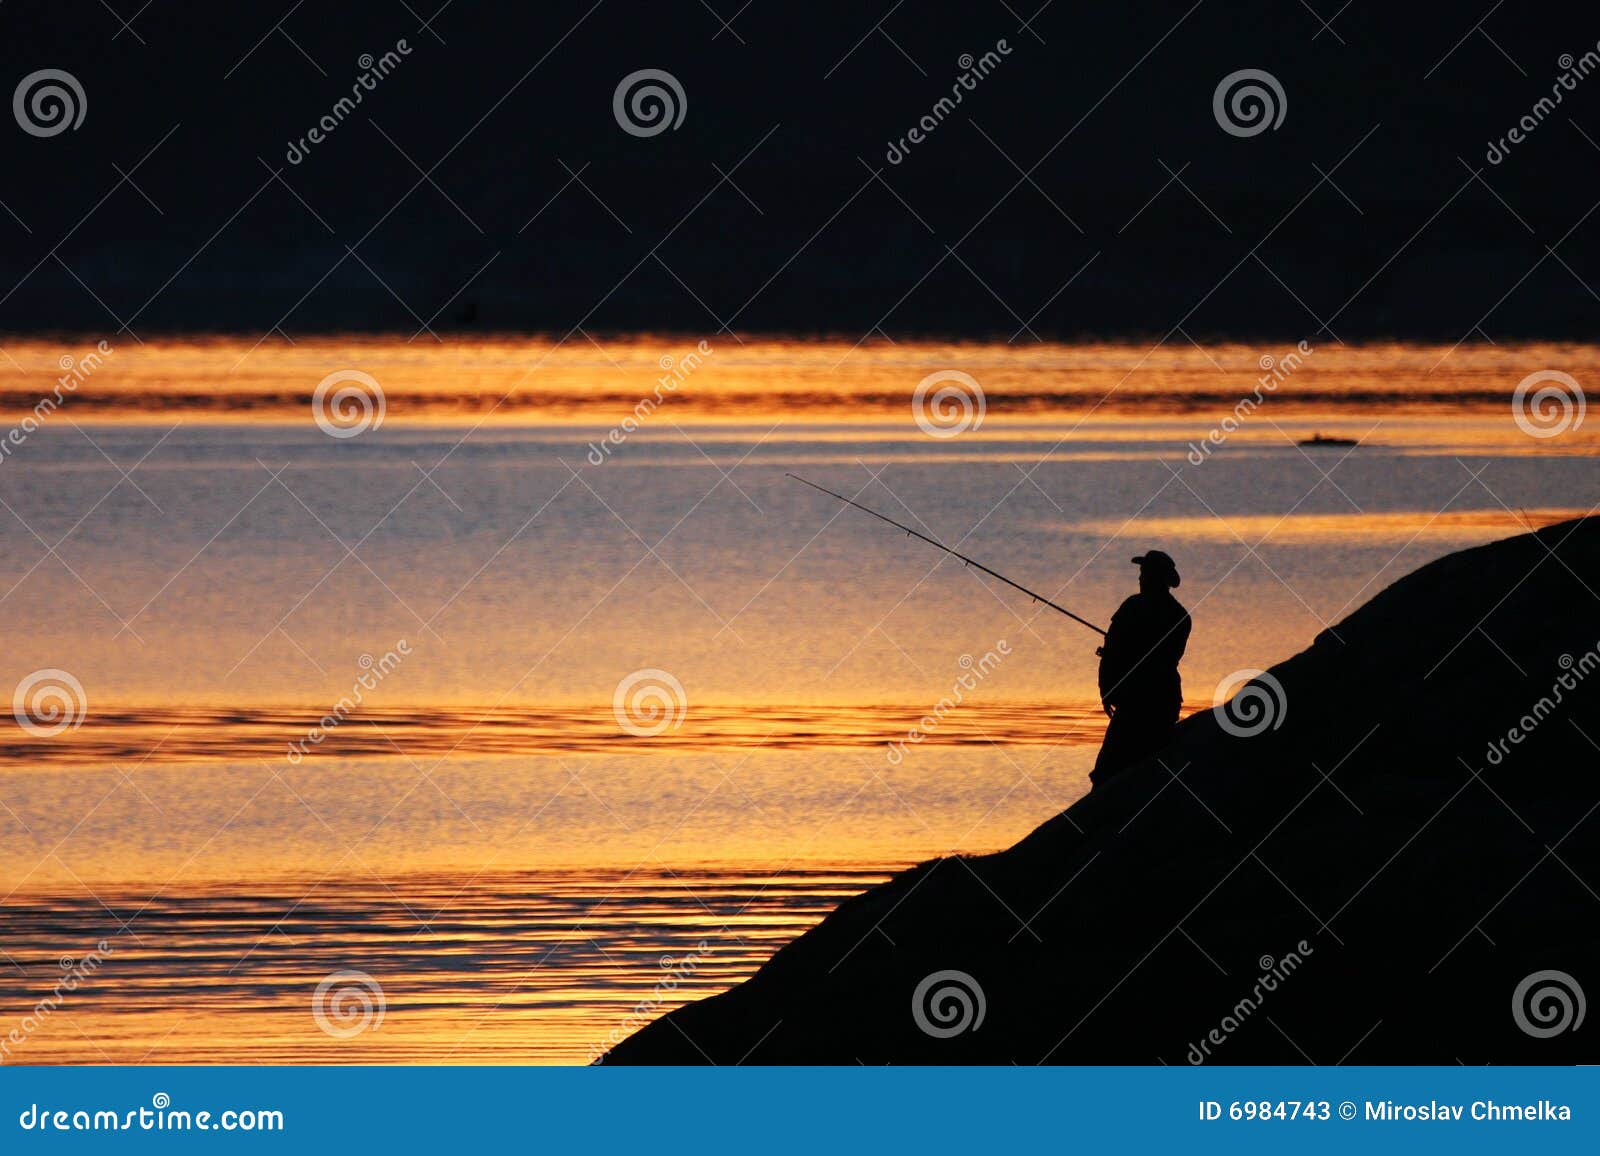 fishman and sunset